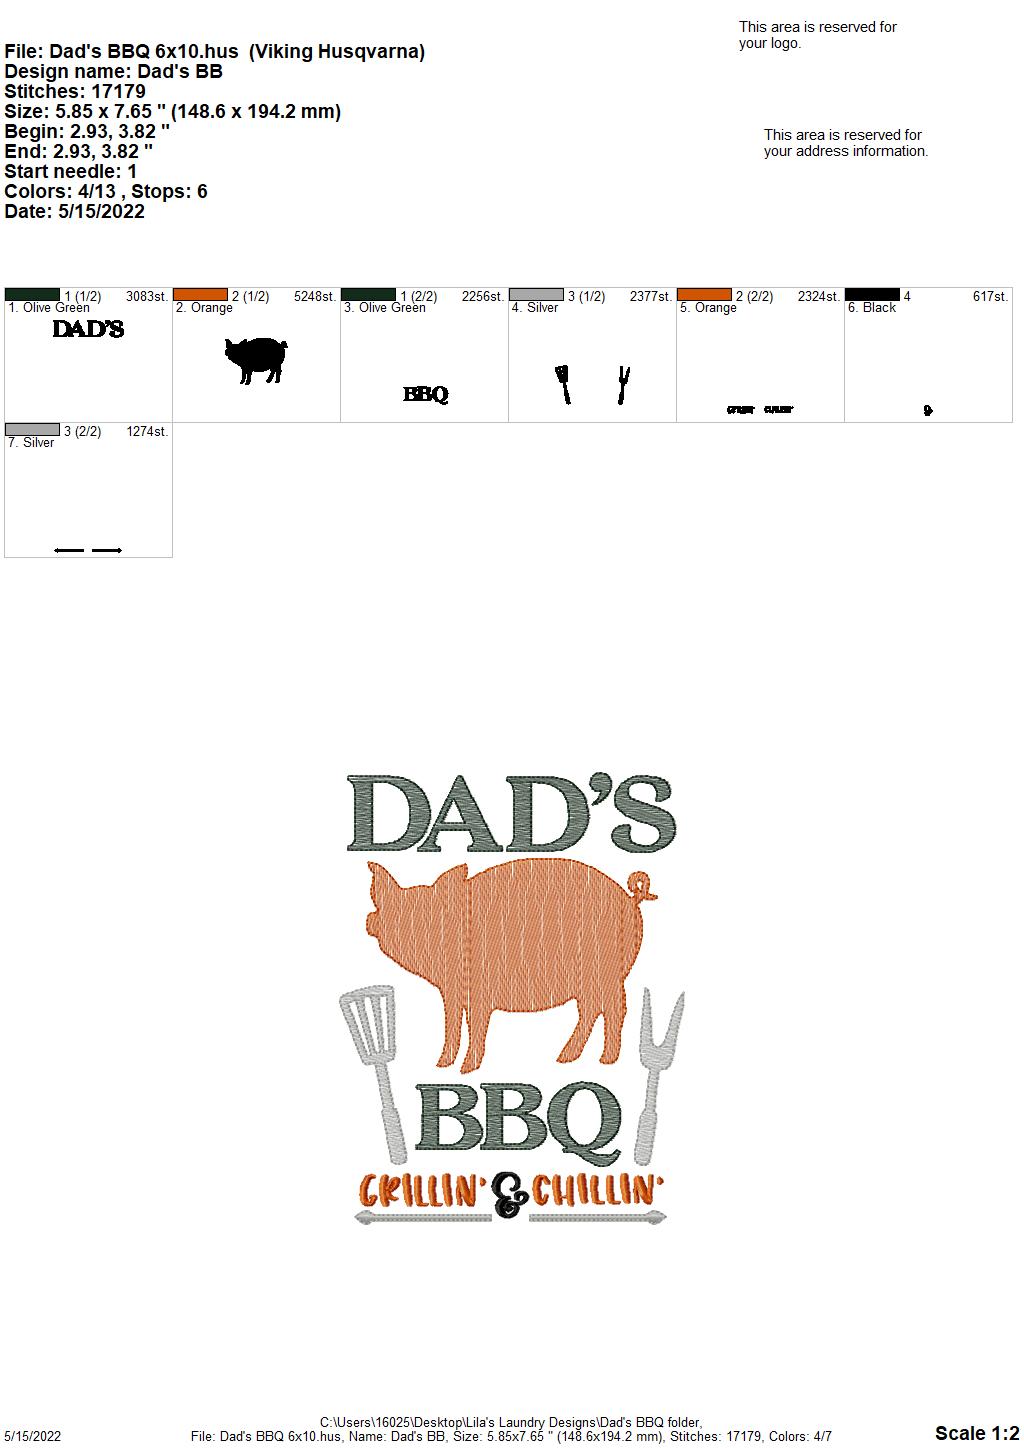 Dad's BBQ - 2 sizes- Digital Embroidery Design